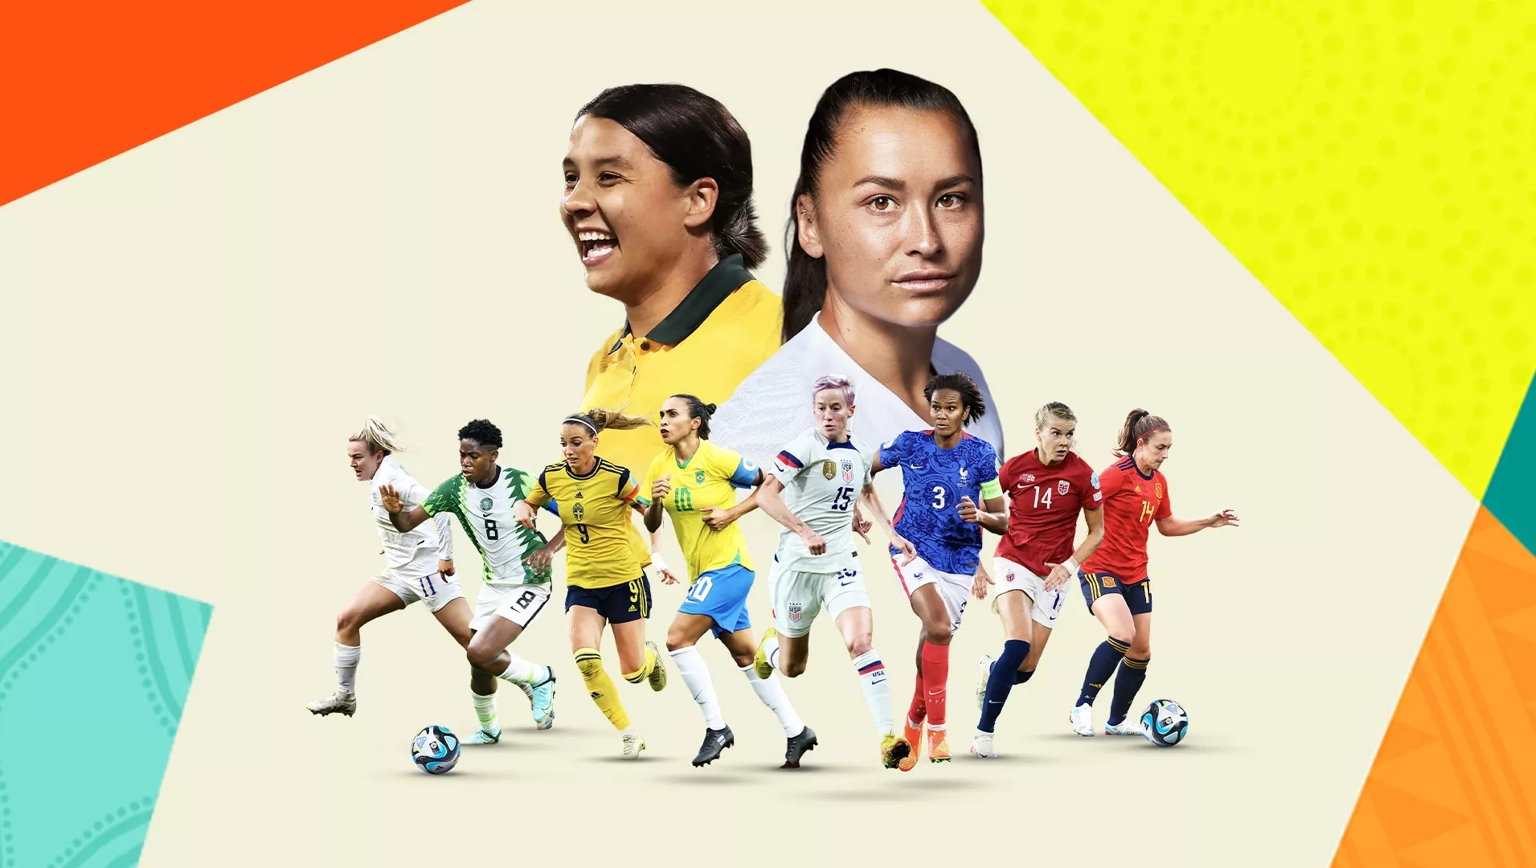 DDE21CA2 2AE6 46BF 8D5B 3A68A06E8D54 - Who will light up the Womens World Cup